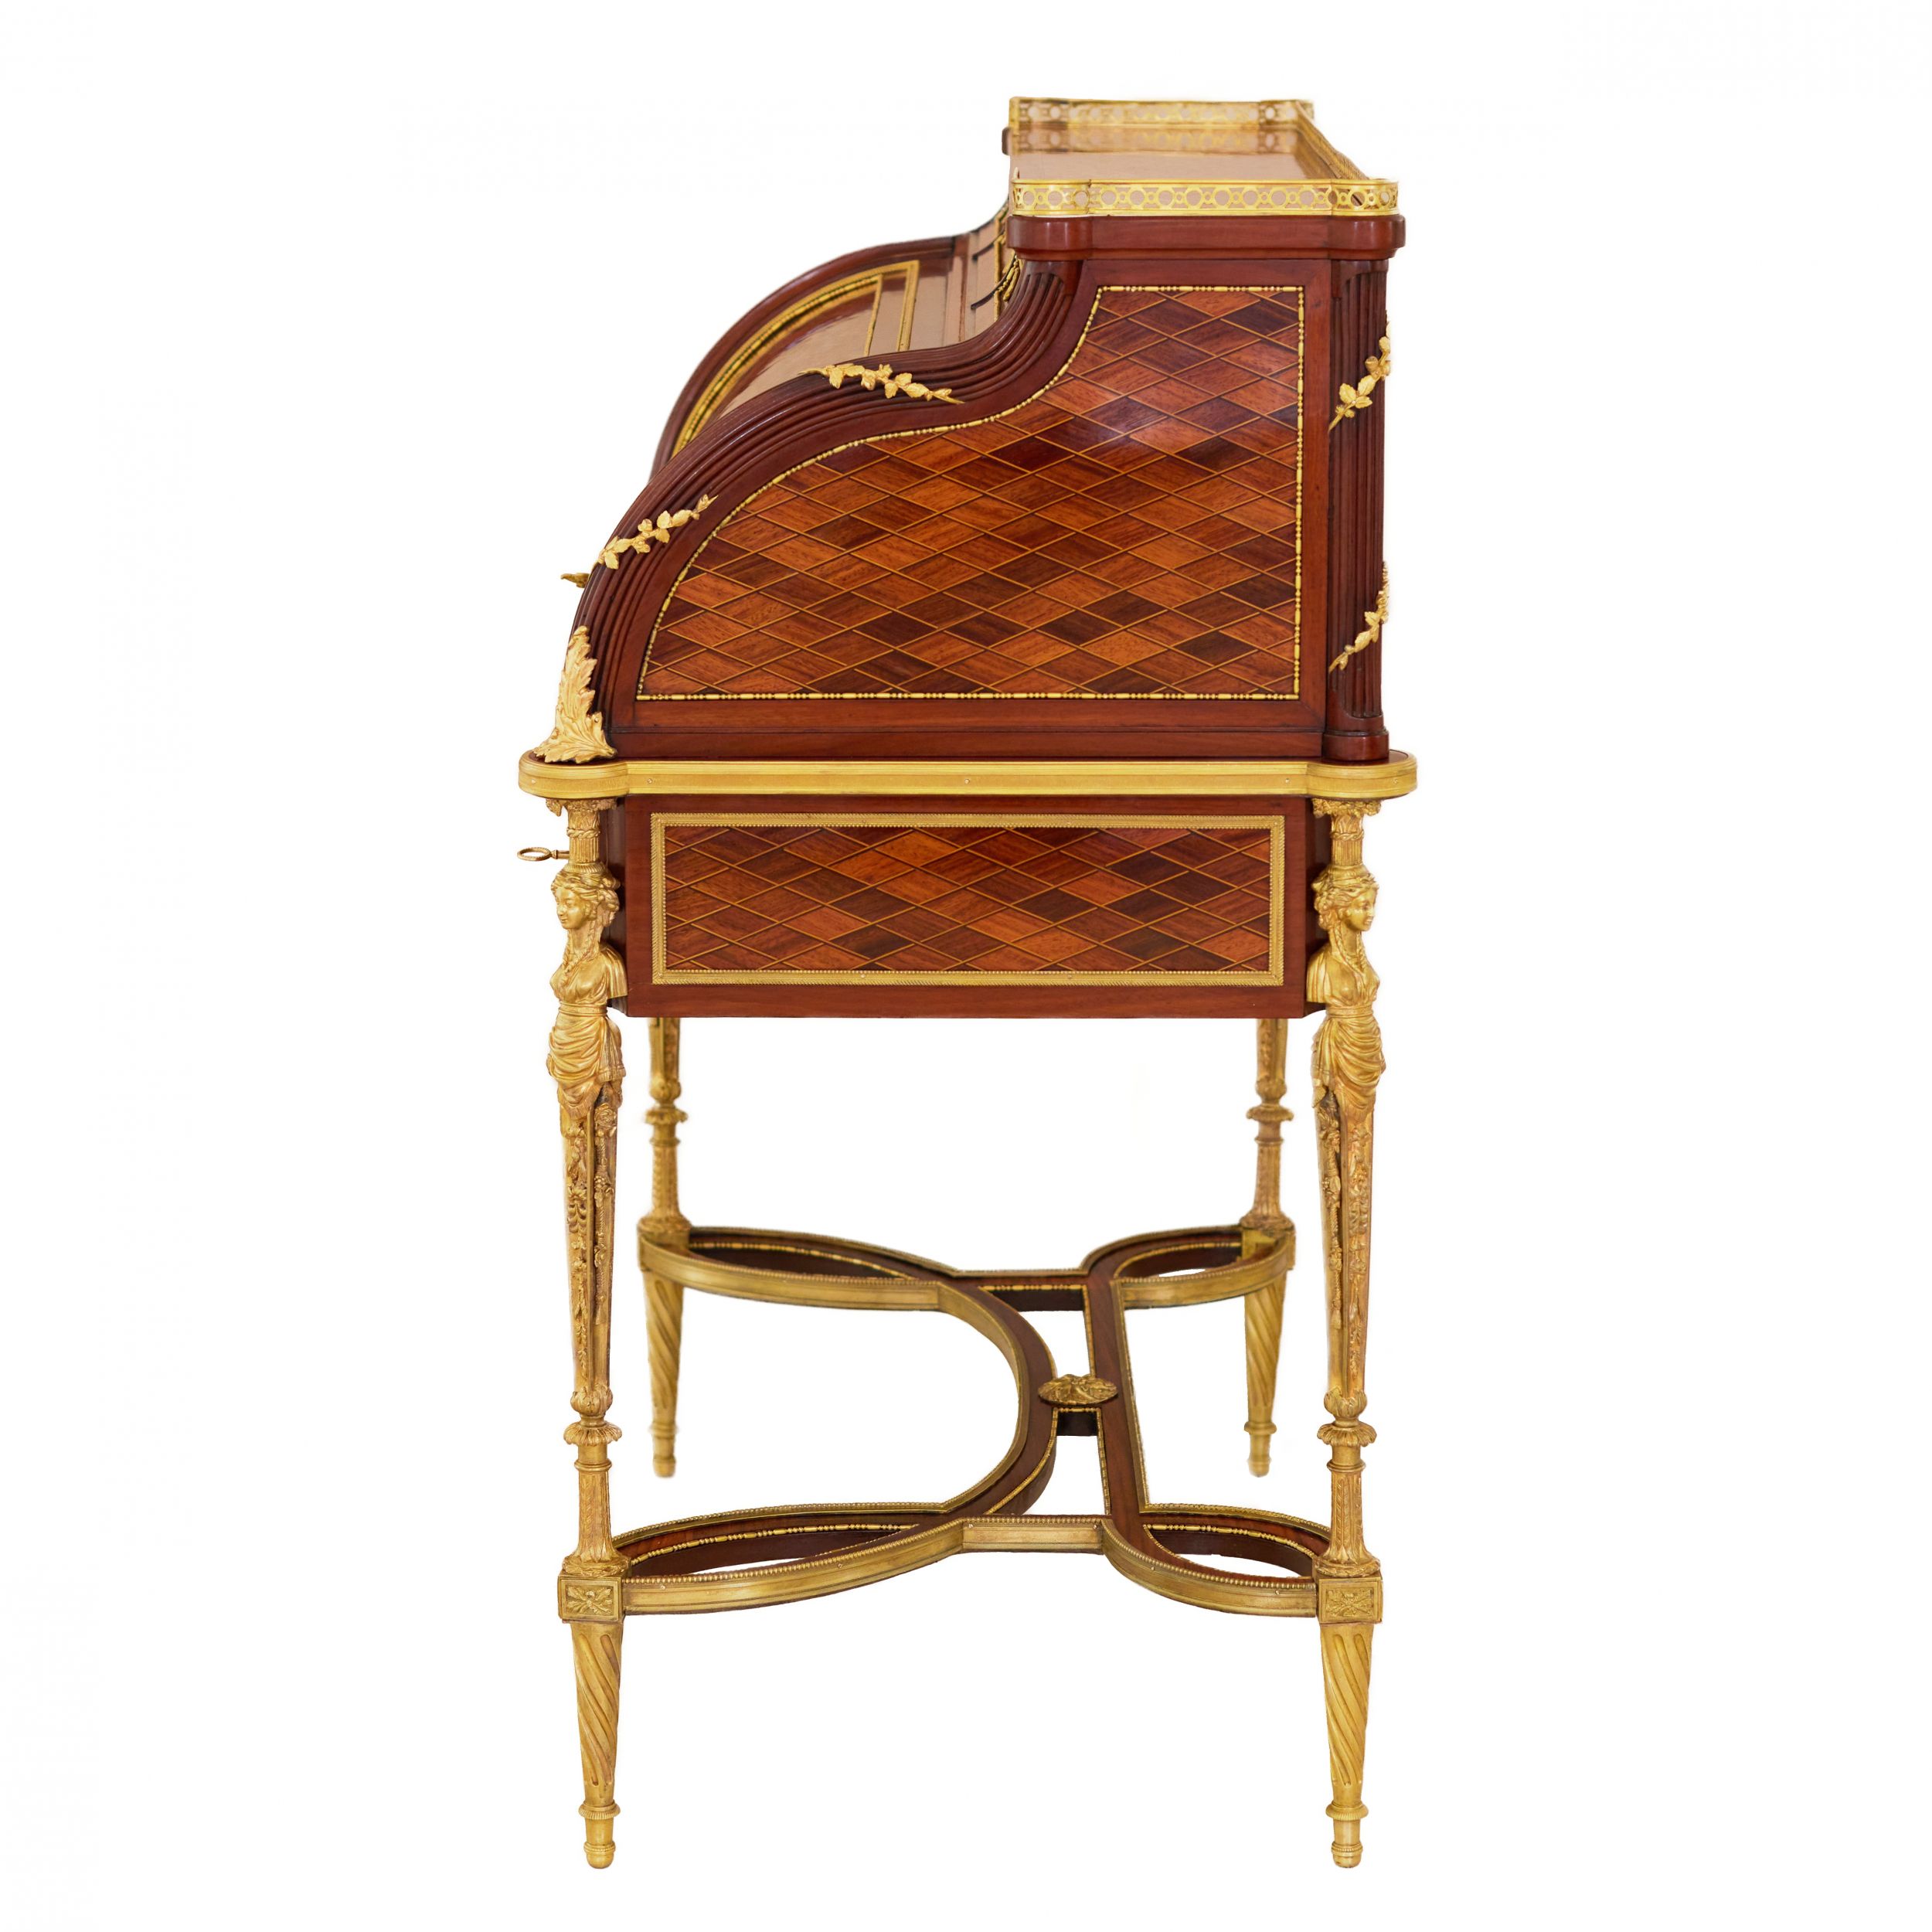 E.KAHN. A magnificent cylindrical bureau in mahogany and satin wood with gilt bronze. - Image 8 of 14